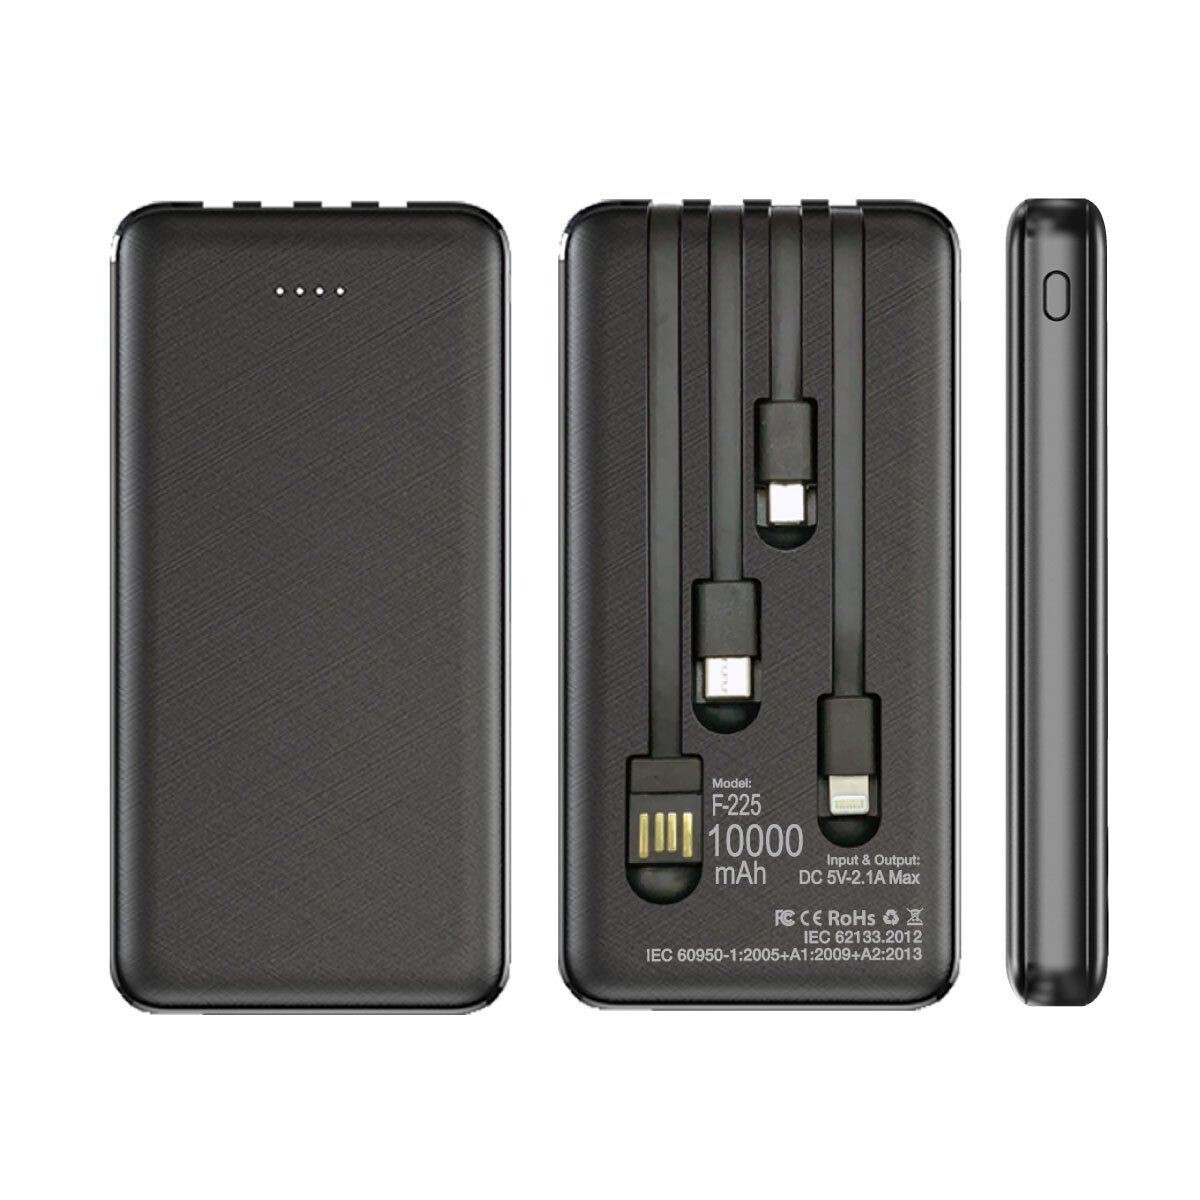 Powerline Powerbank with 4 Built-in Cable and with 2-pc Black Box (10,000mAh Capacity)